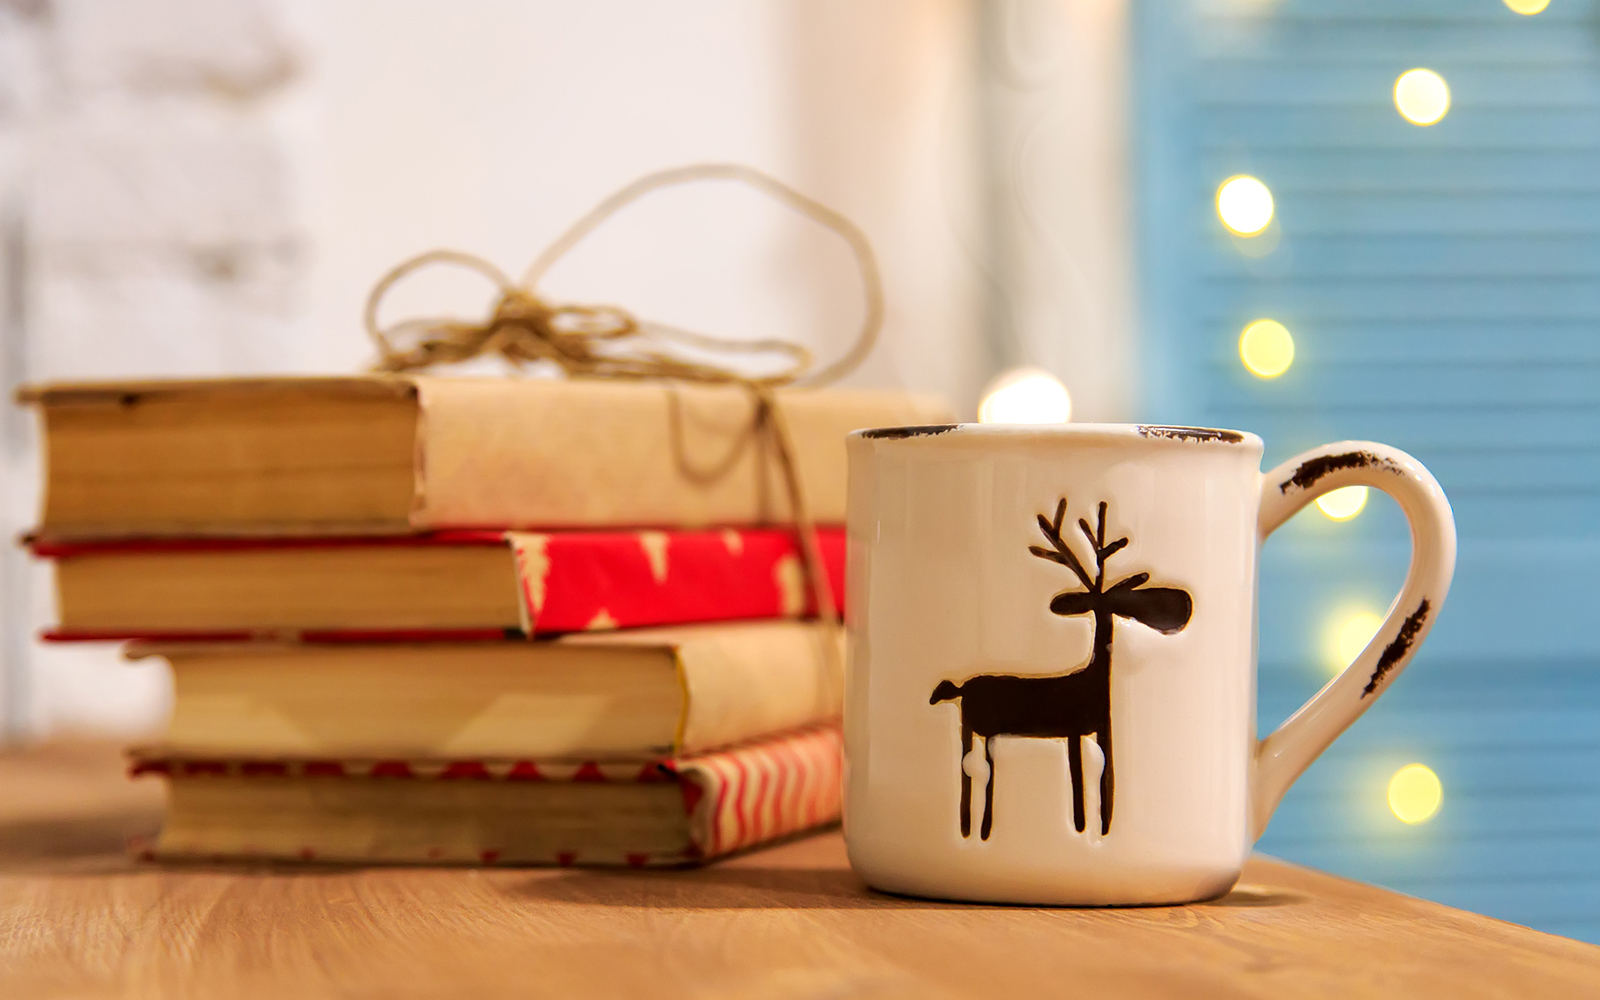 Winter tea. Winter books. A cup of hot tea, books, Christmas shining garland on a wooden background. Winter holidays.